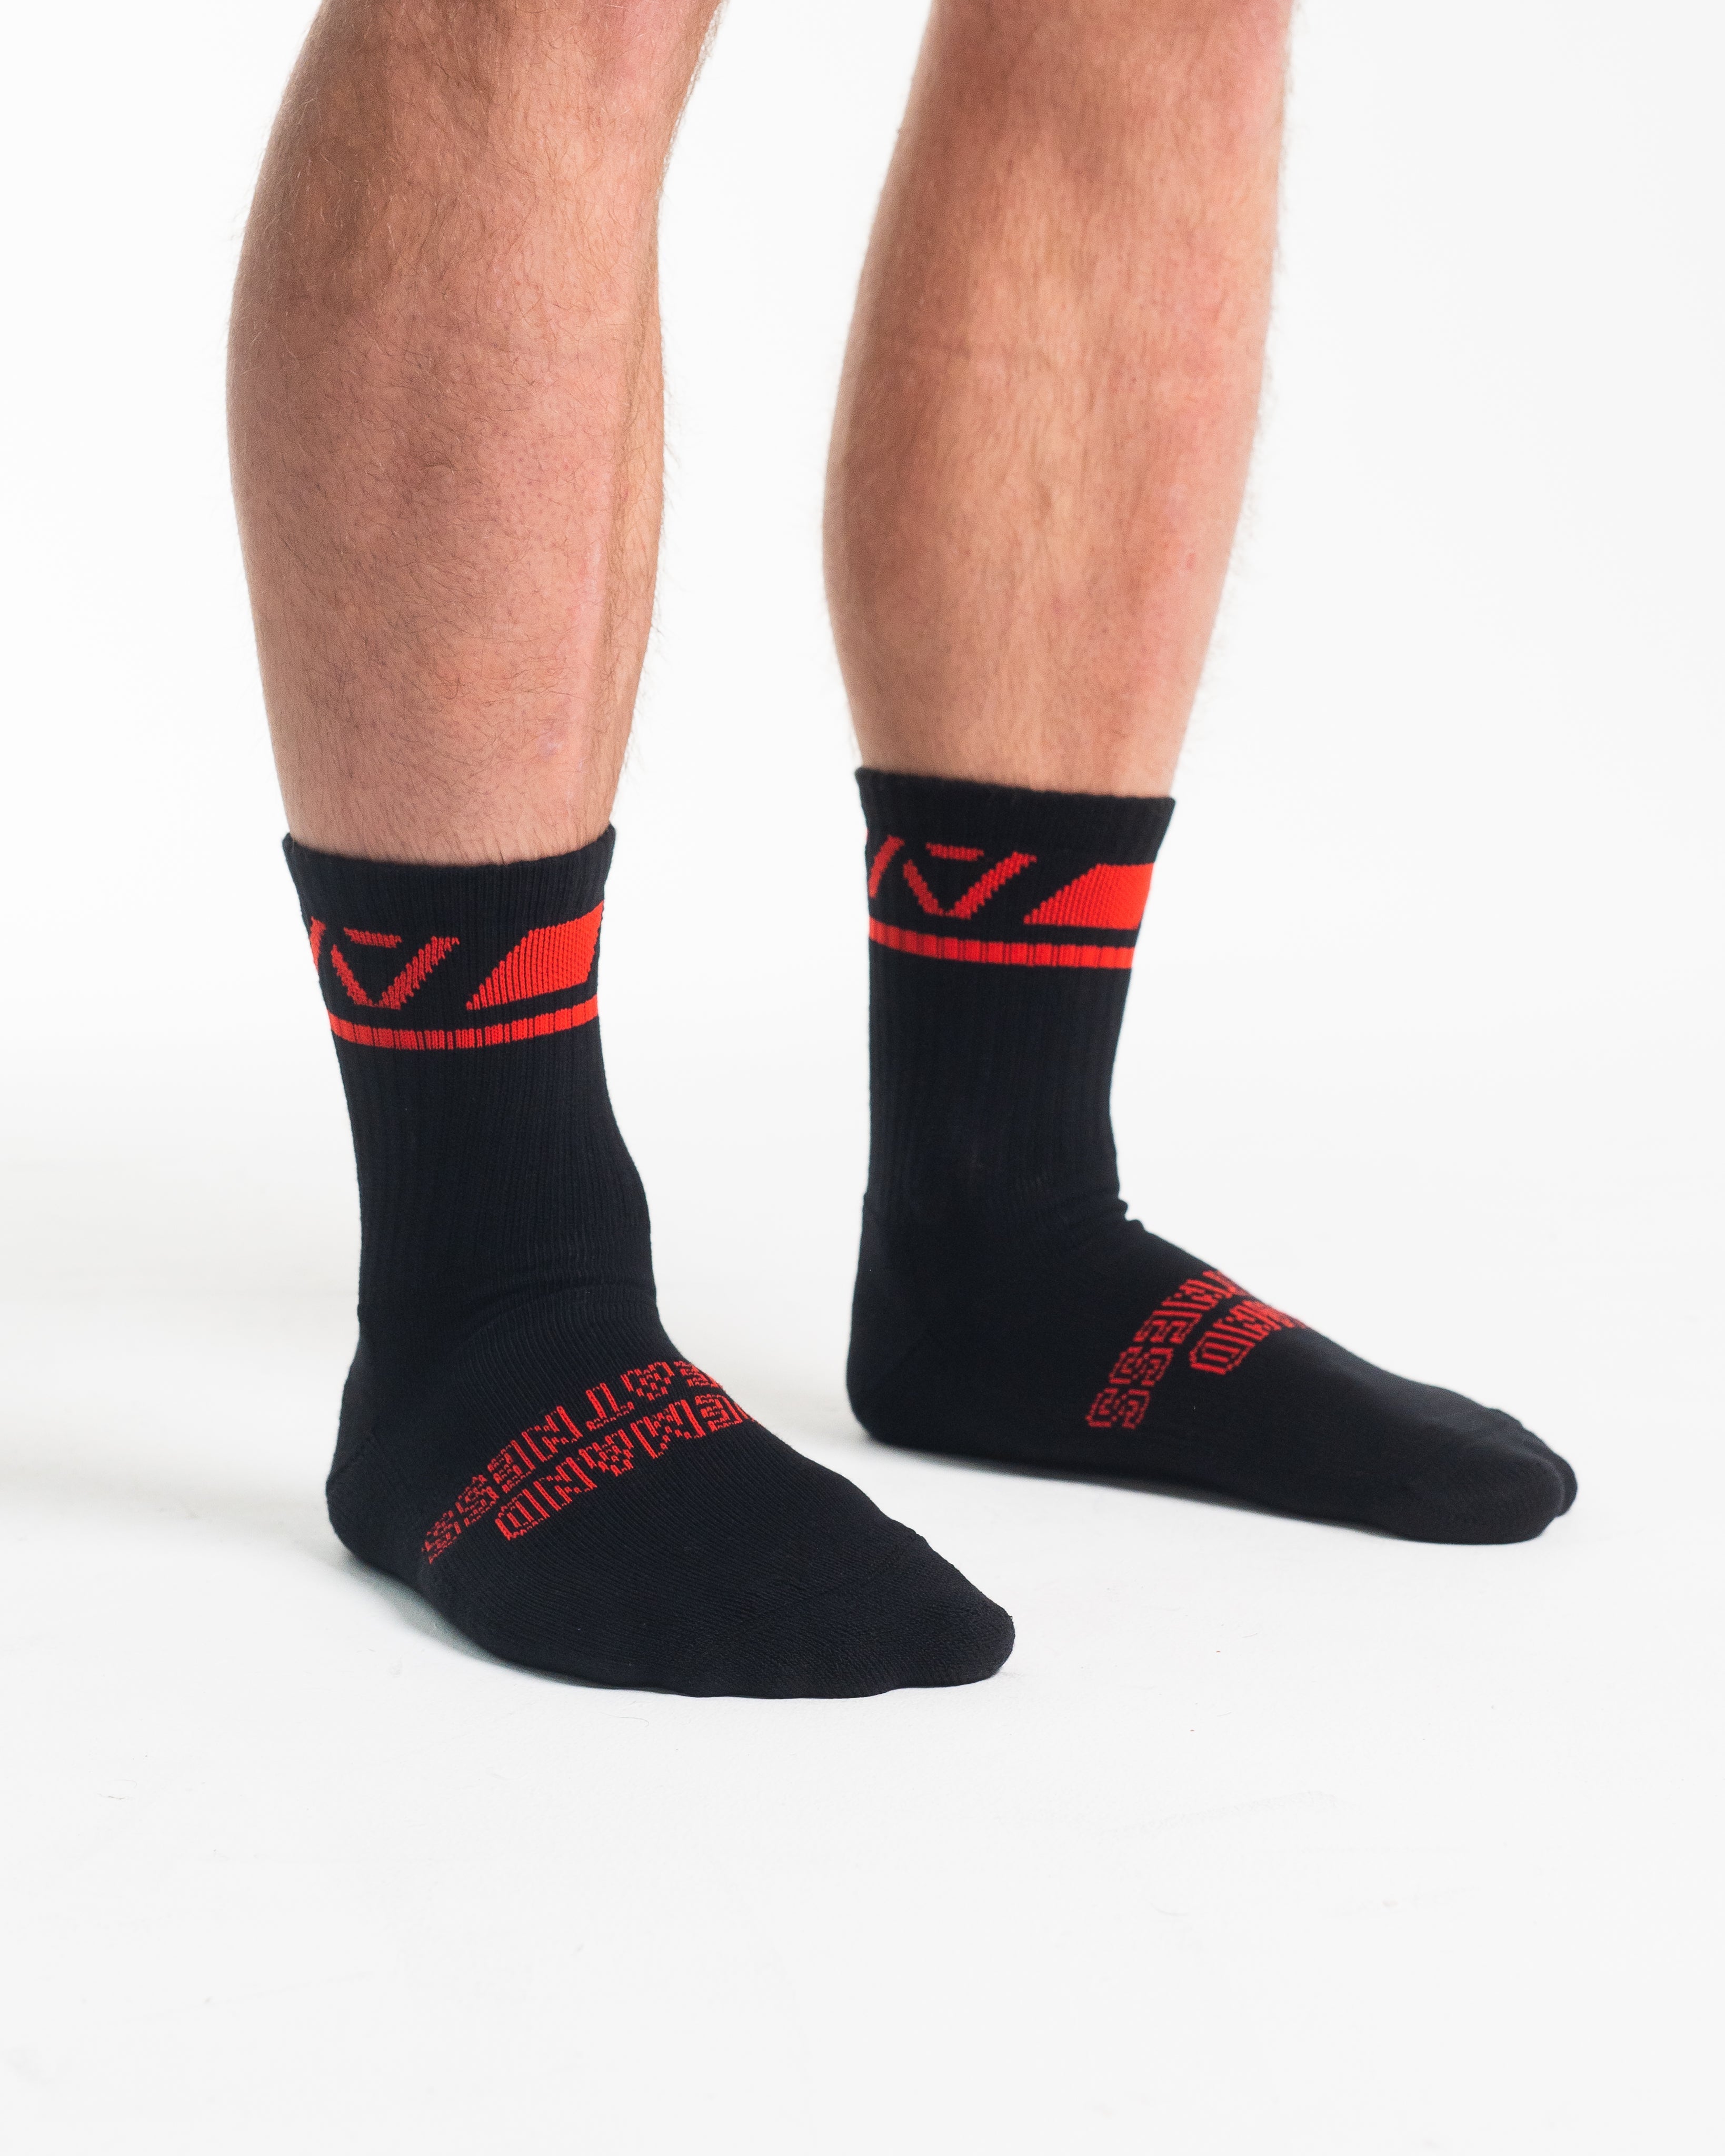 A7 Red Dawn Crew socks showcase dark grey logos to keep contrast at a minimum and let your energy show on the platform, in your training or while out and about. The IPF Approved Shadow Stone Meet Kit includes Powerlifting Singlet, A7 Meet Shirt, A7 Zebra Wrist Wraps, A7 Deadlift Socks, Hourglass Knee Sleeves (Stiff Knee Sleeves and Rigor Mortis Knee Sleeves). Genouillères powerlifting shipping to France, Spain, Ireland, Germany, Italy, Sweden and EU.